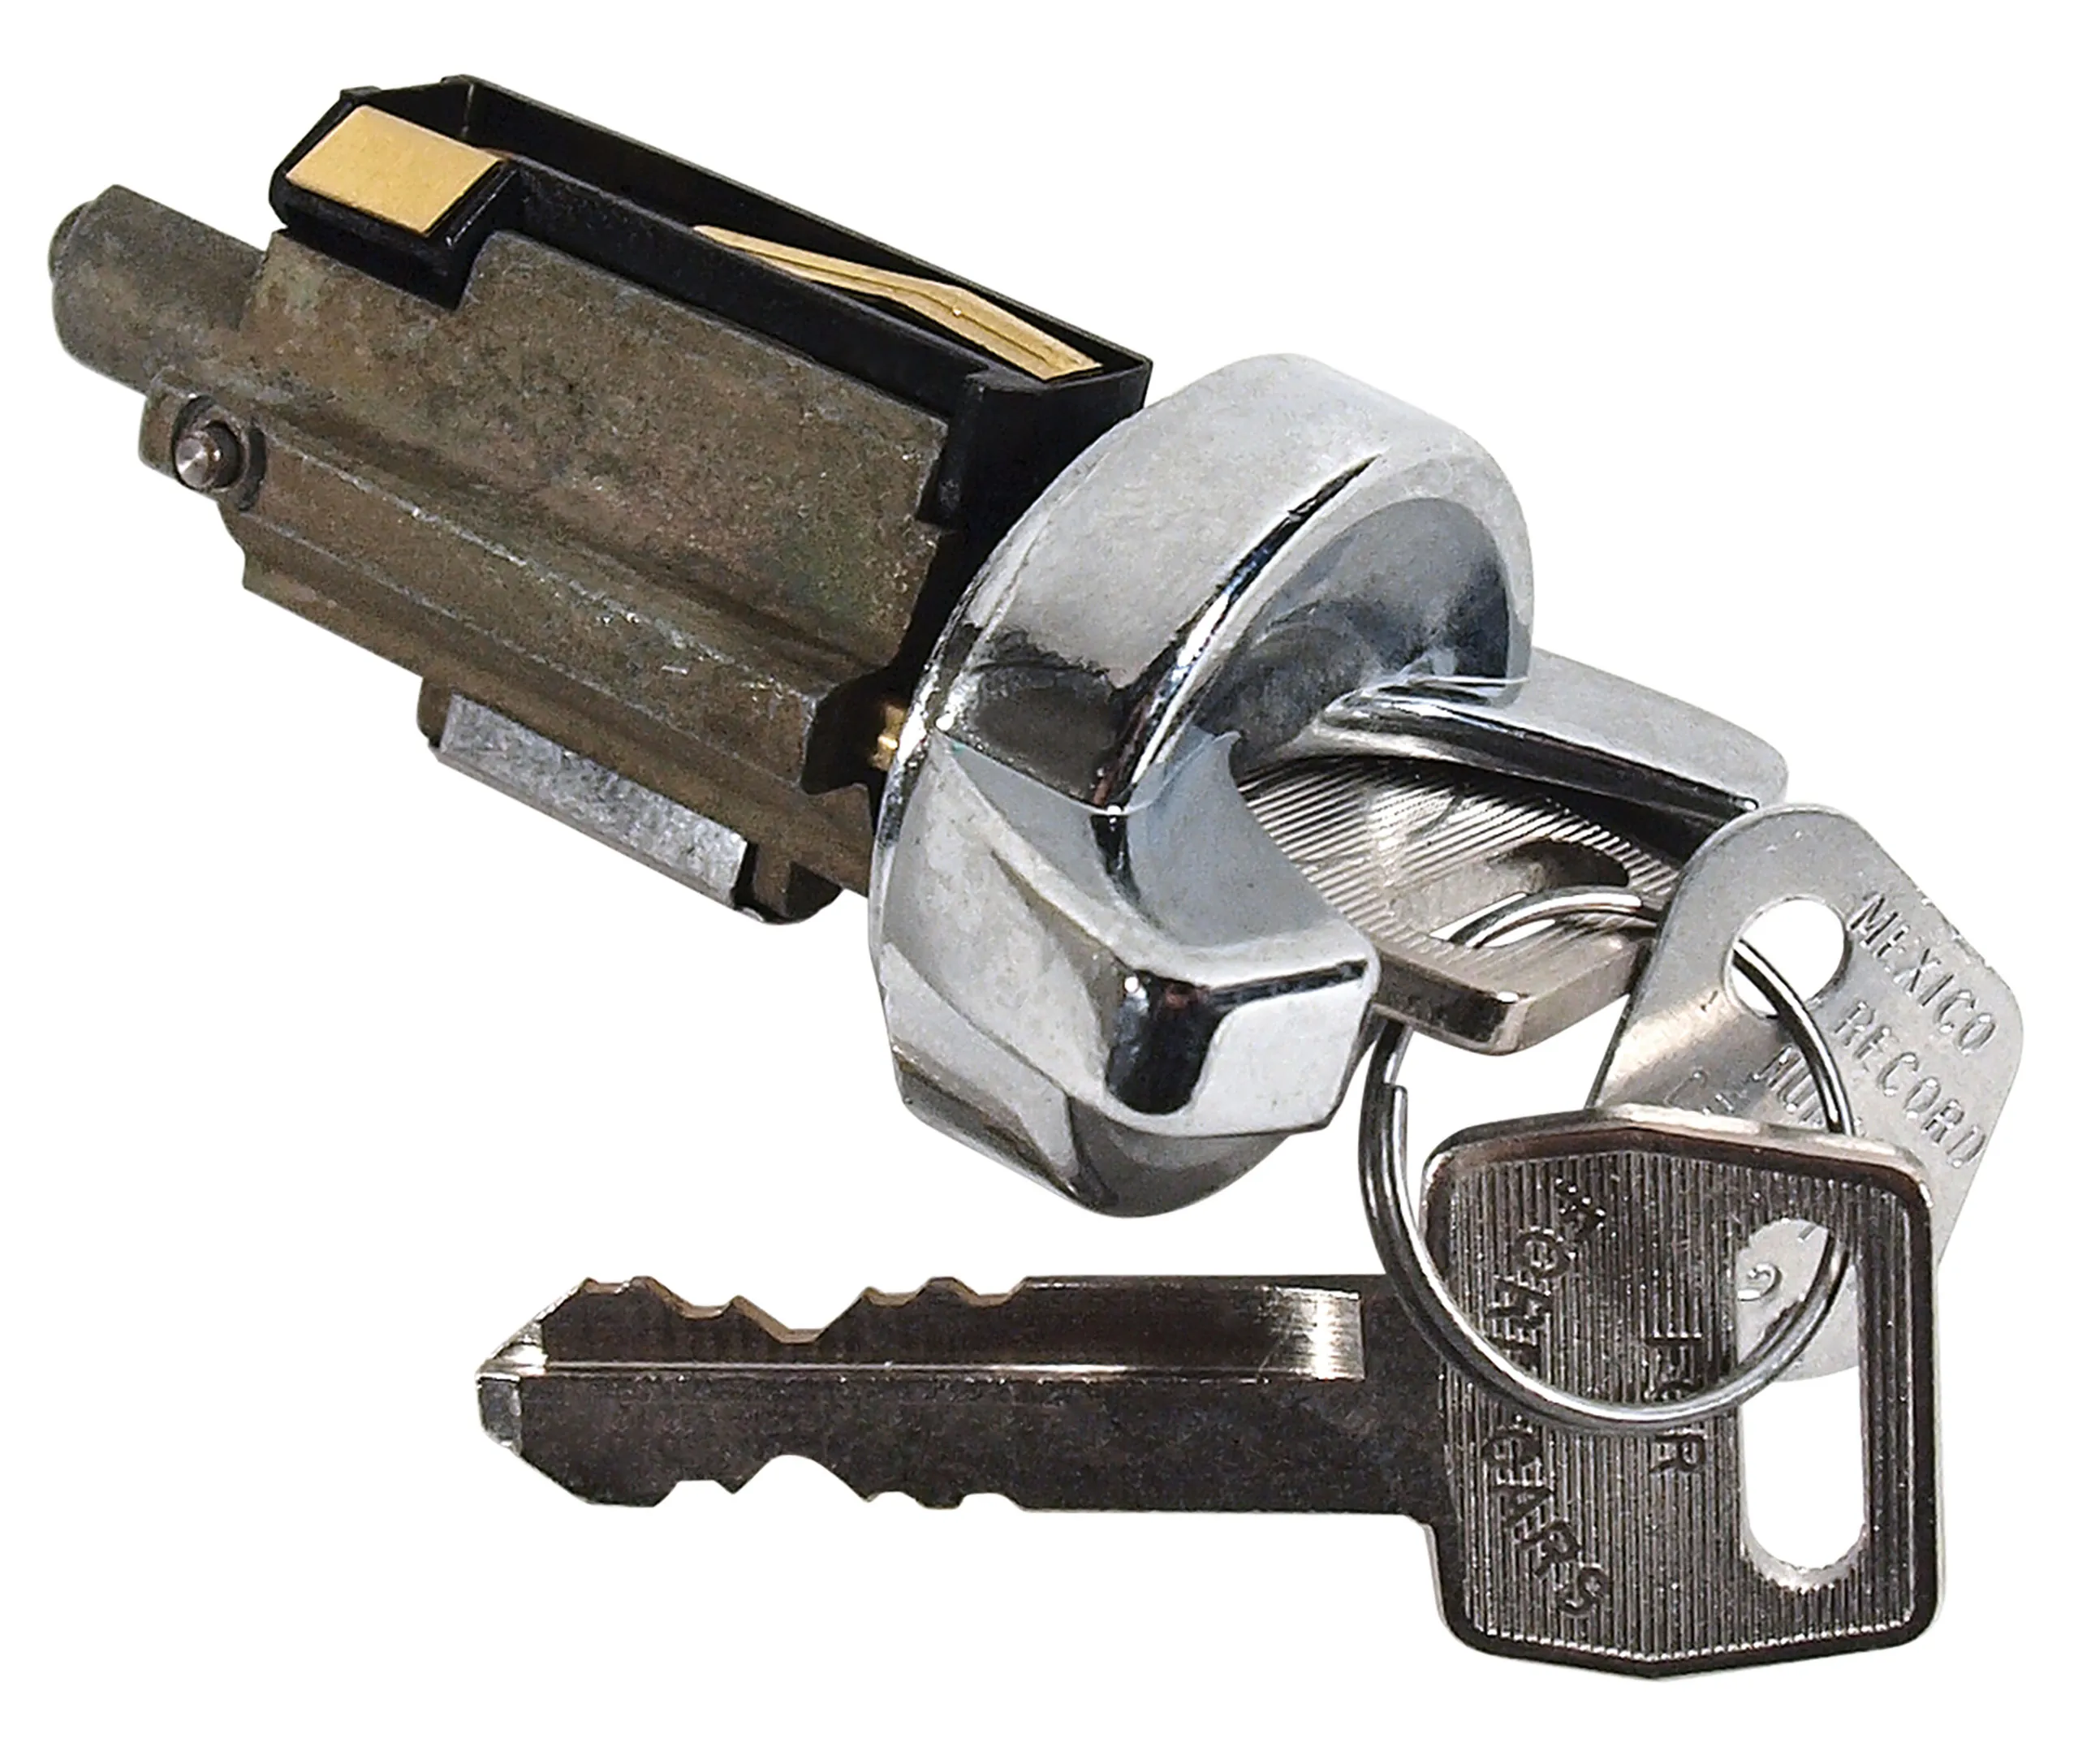 First Generation 1970-1973 Ford Mustang Ignition Locks - Original (Before 5/13/73) - Auto Accessories of America